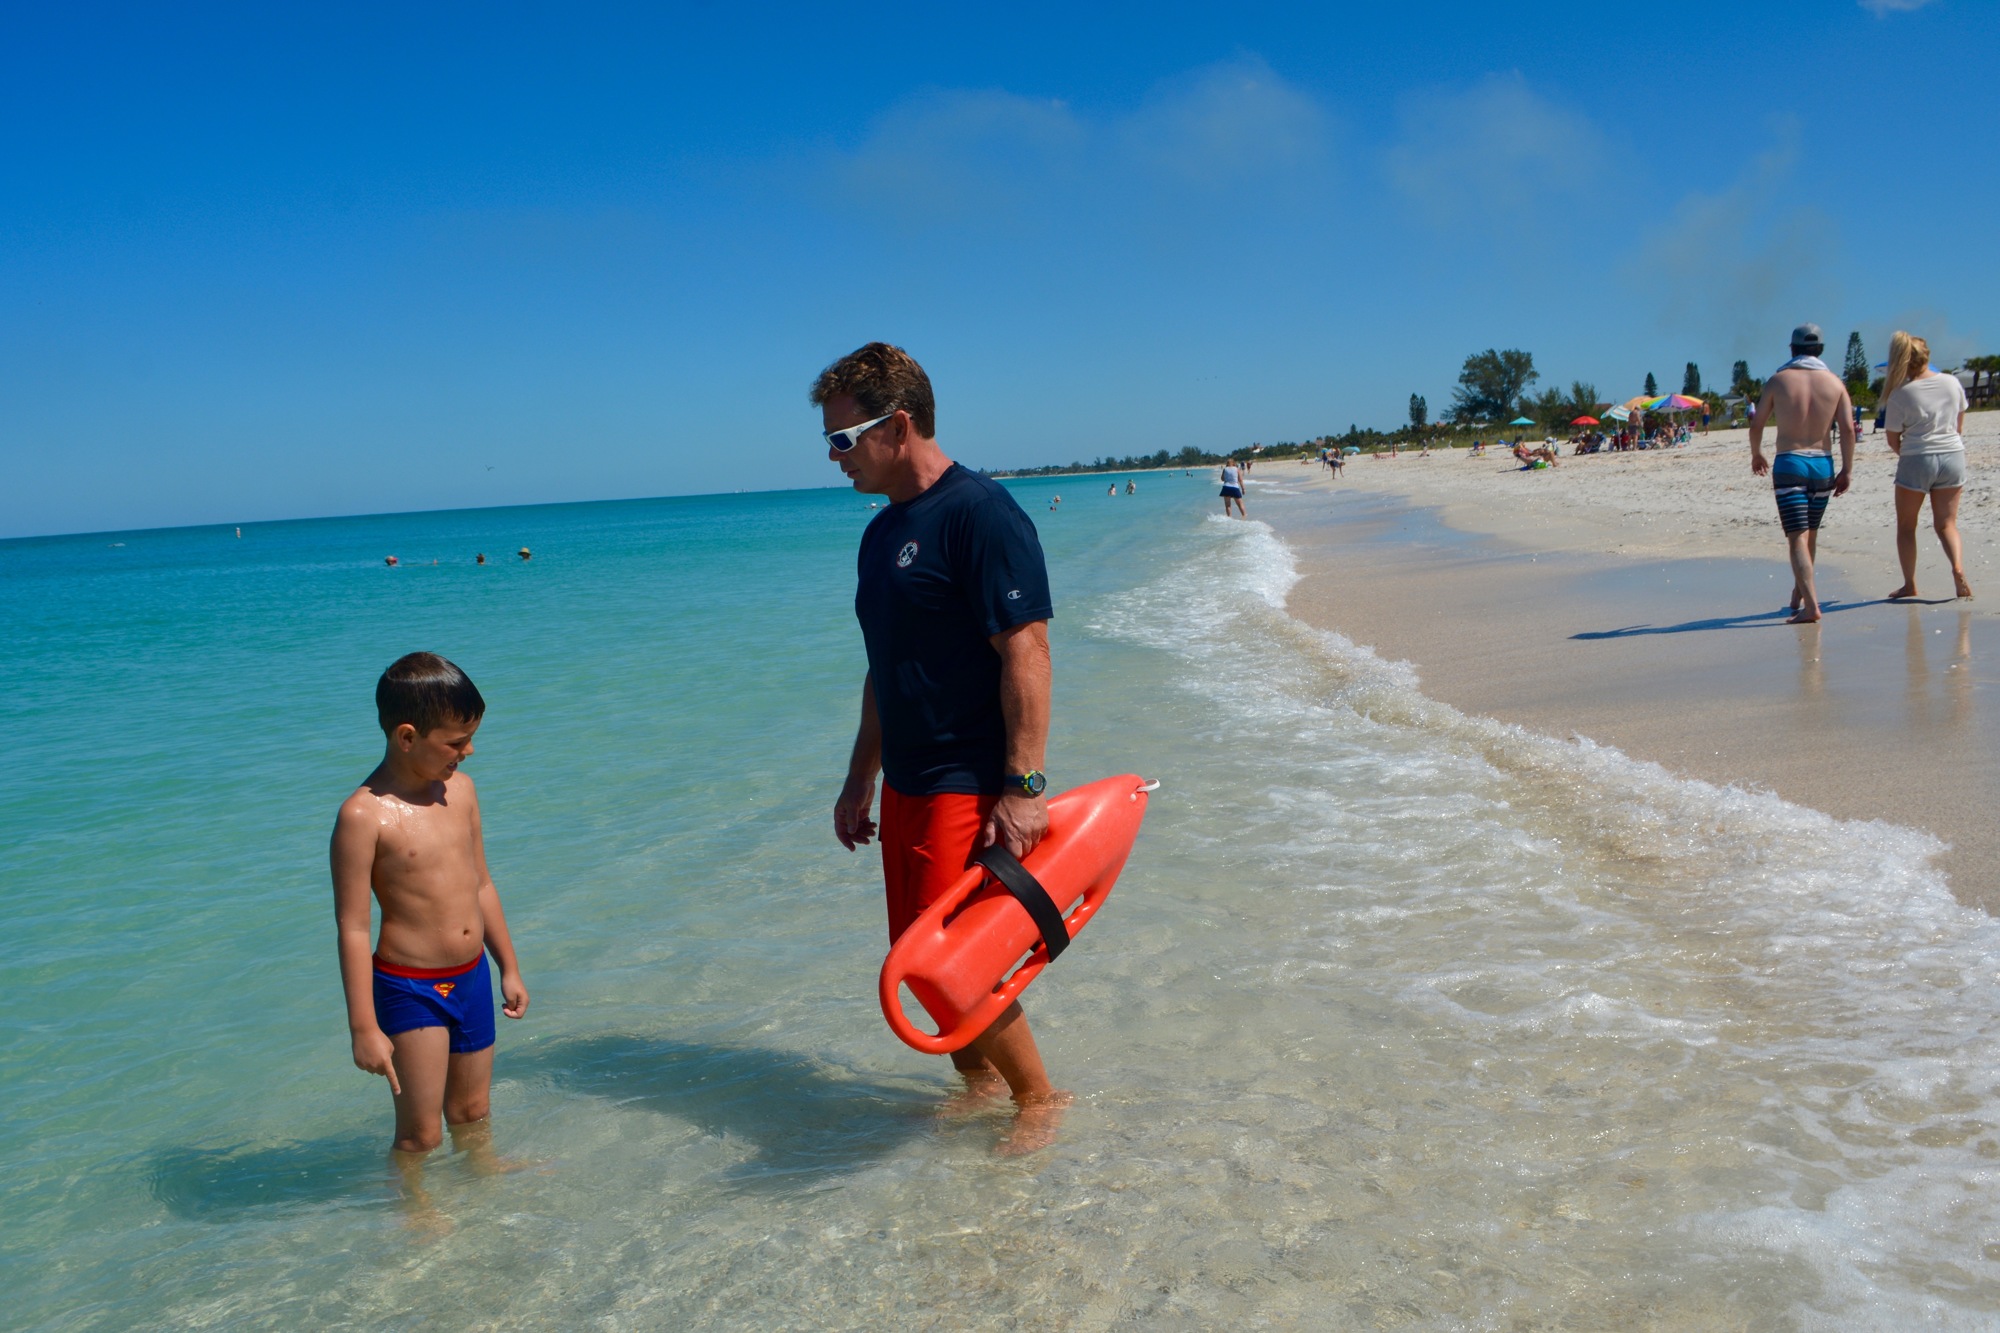 County lifeguard Mark Miller speaks to a young boy at Casey Key Beach